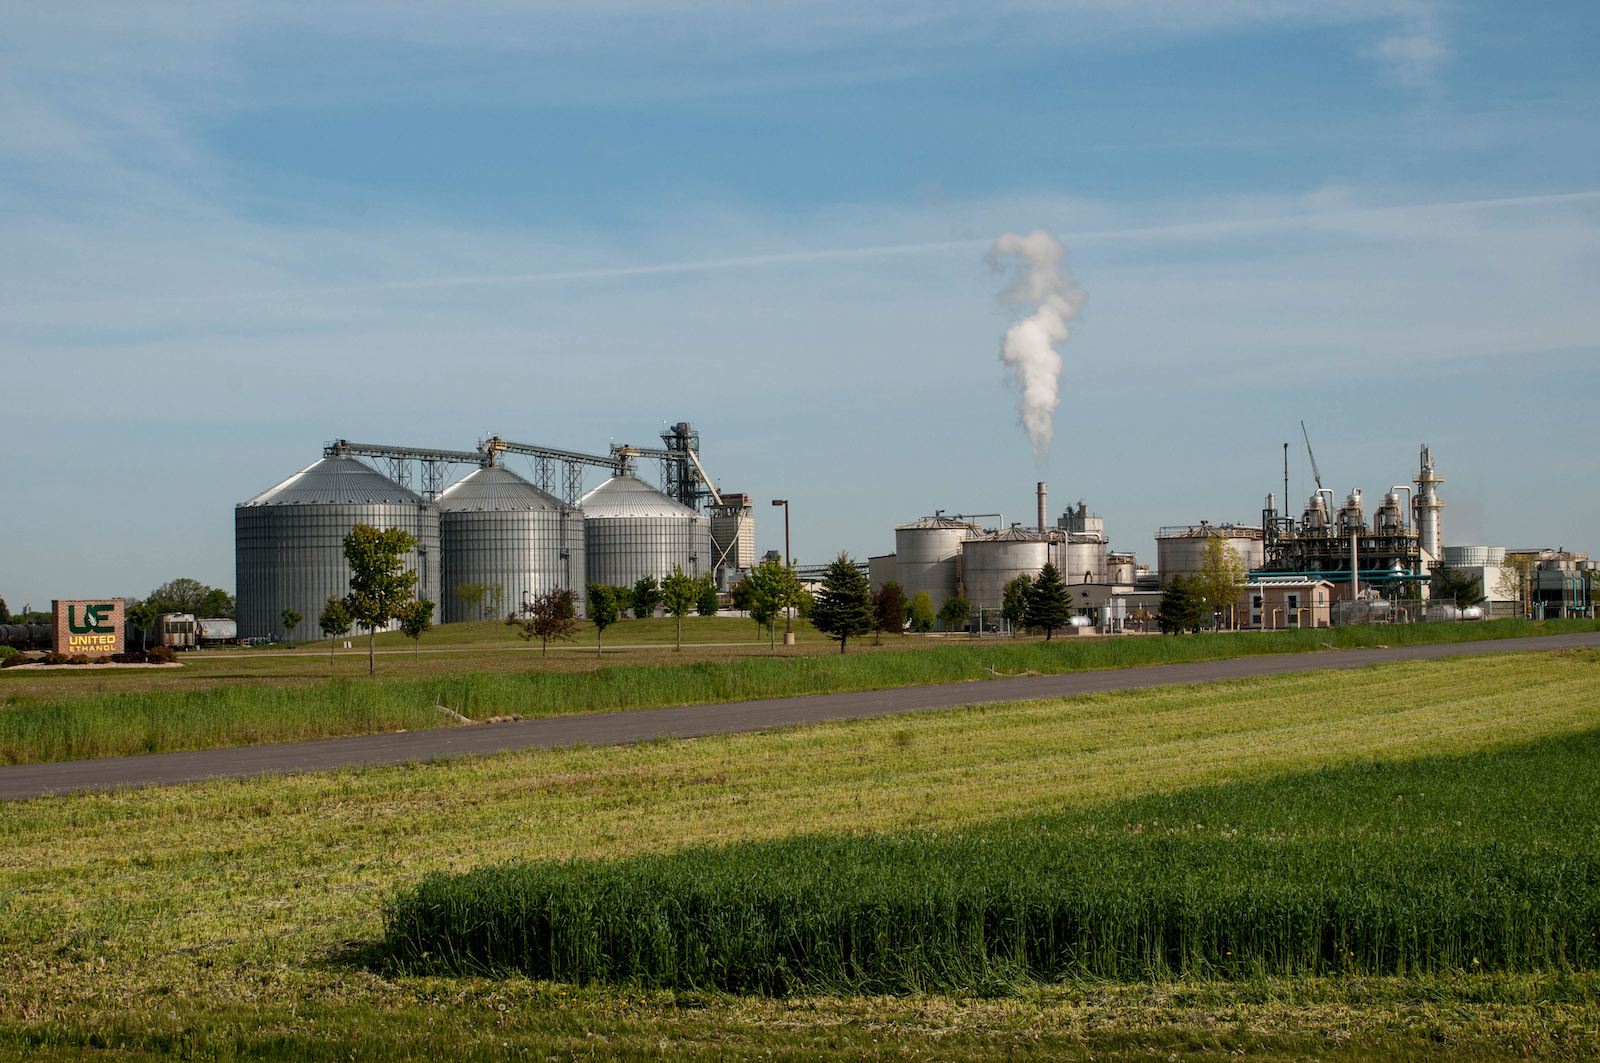 View of an ethanol plant with field in foreground